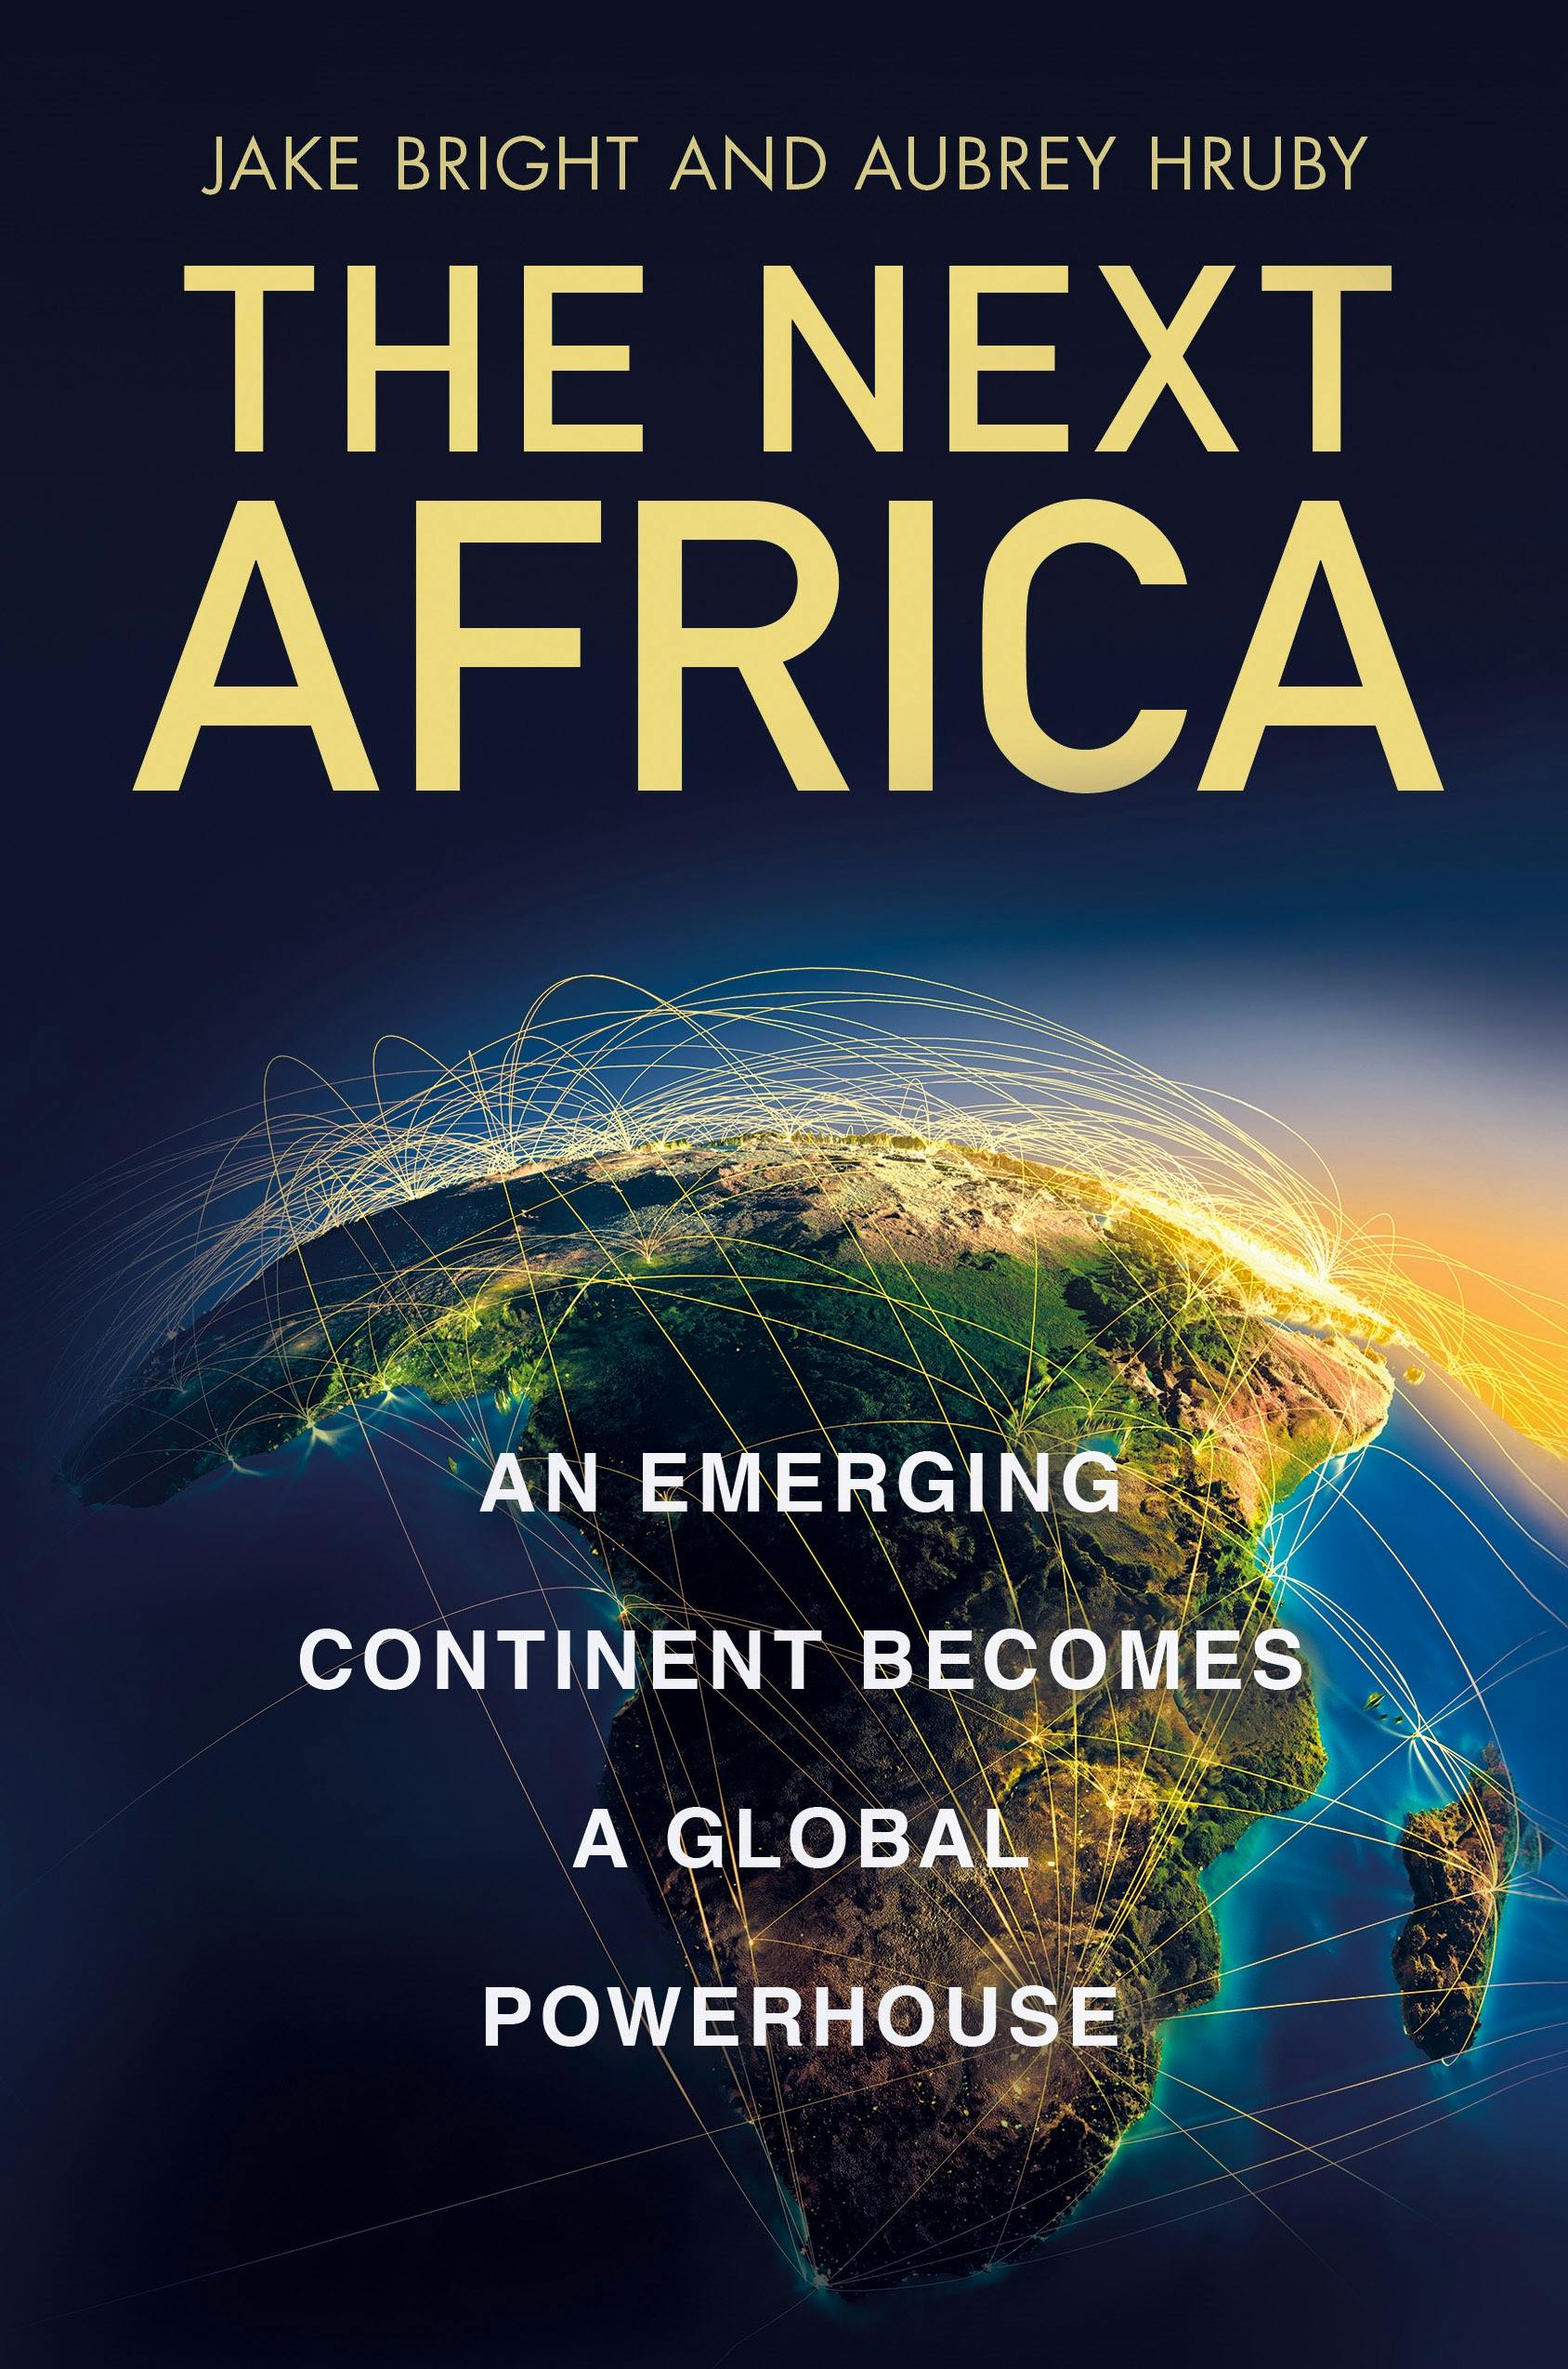 The Next Africa - Tradebook for Courses